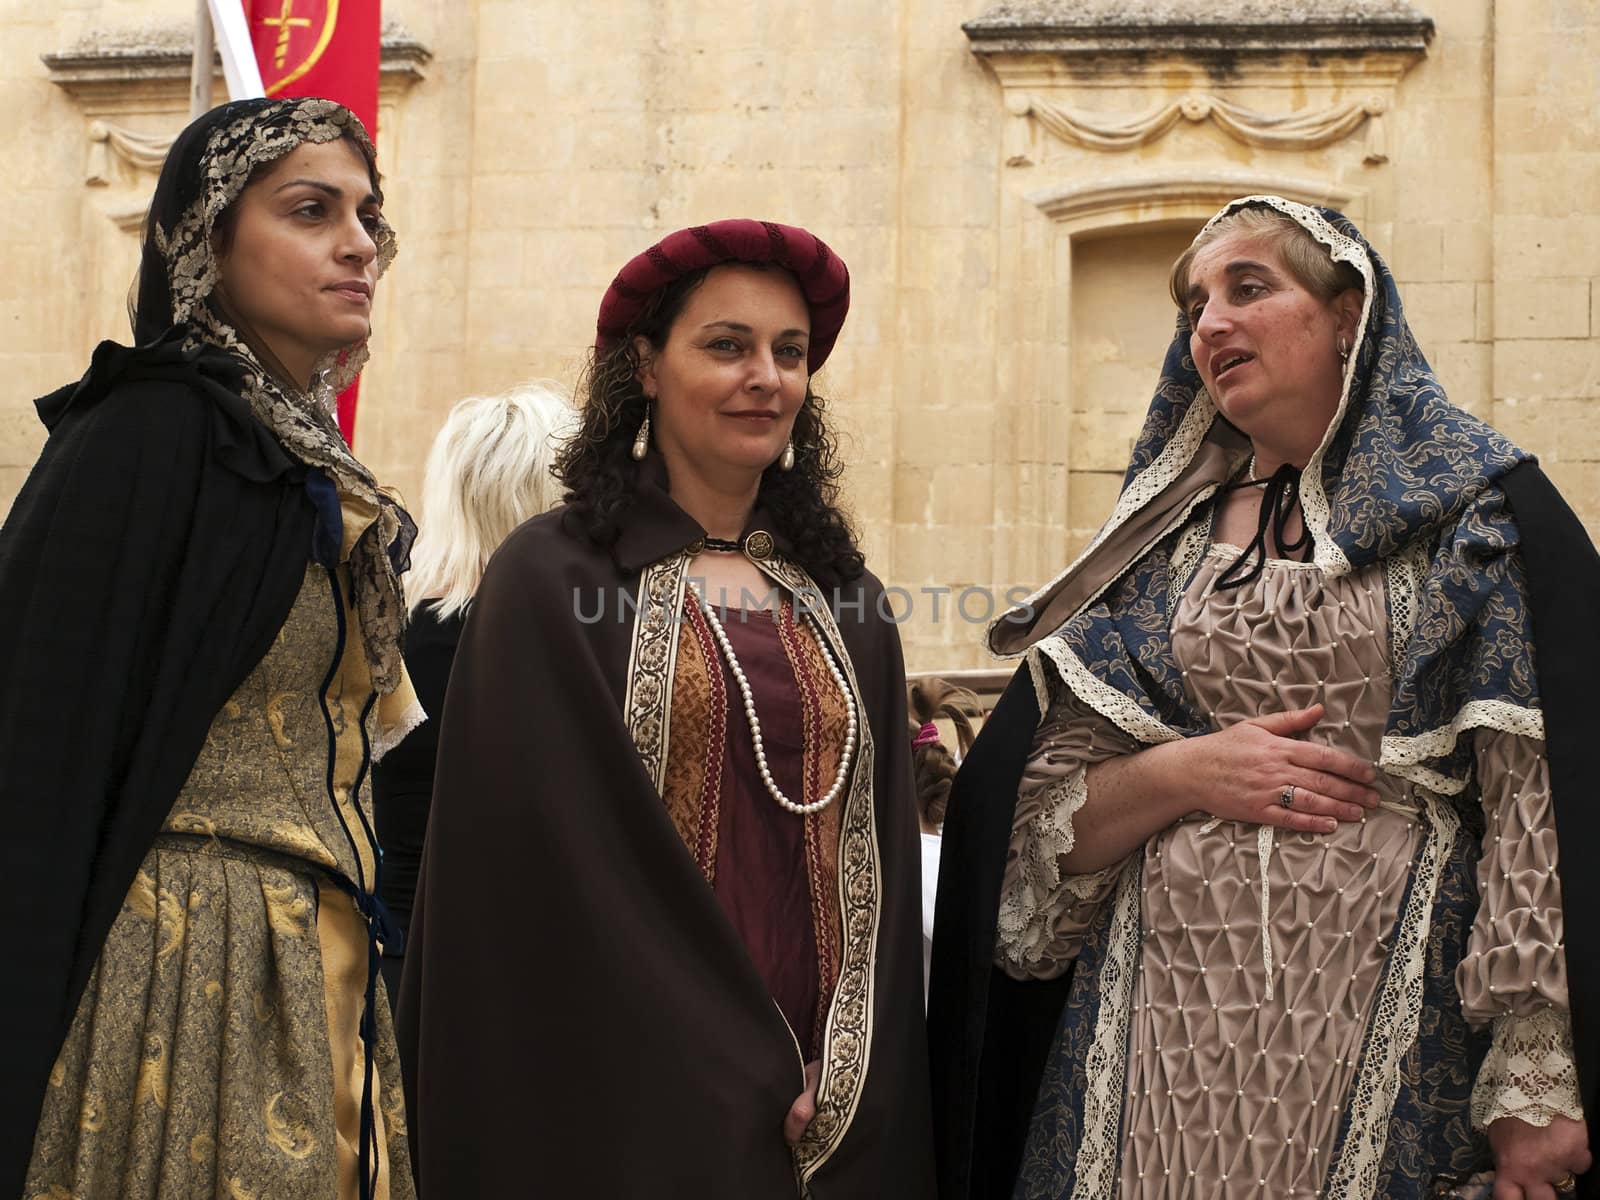 Medieval Noble Women by PhotoWorks